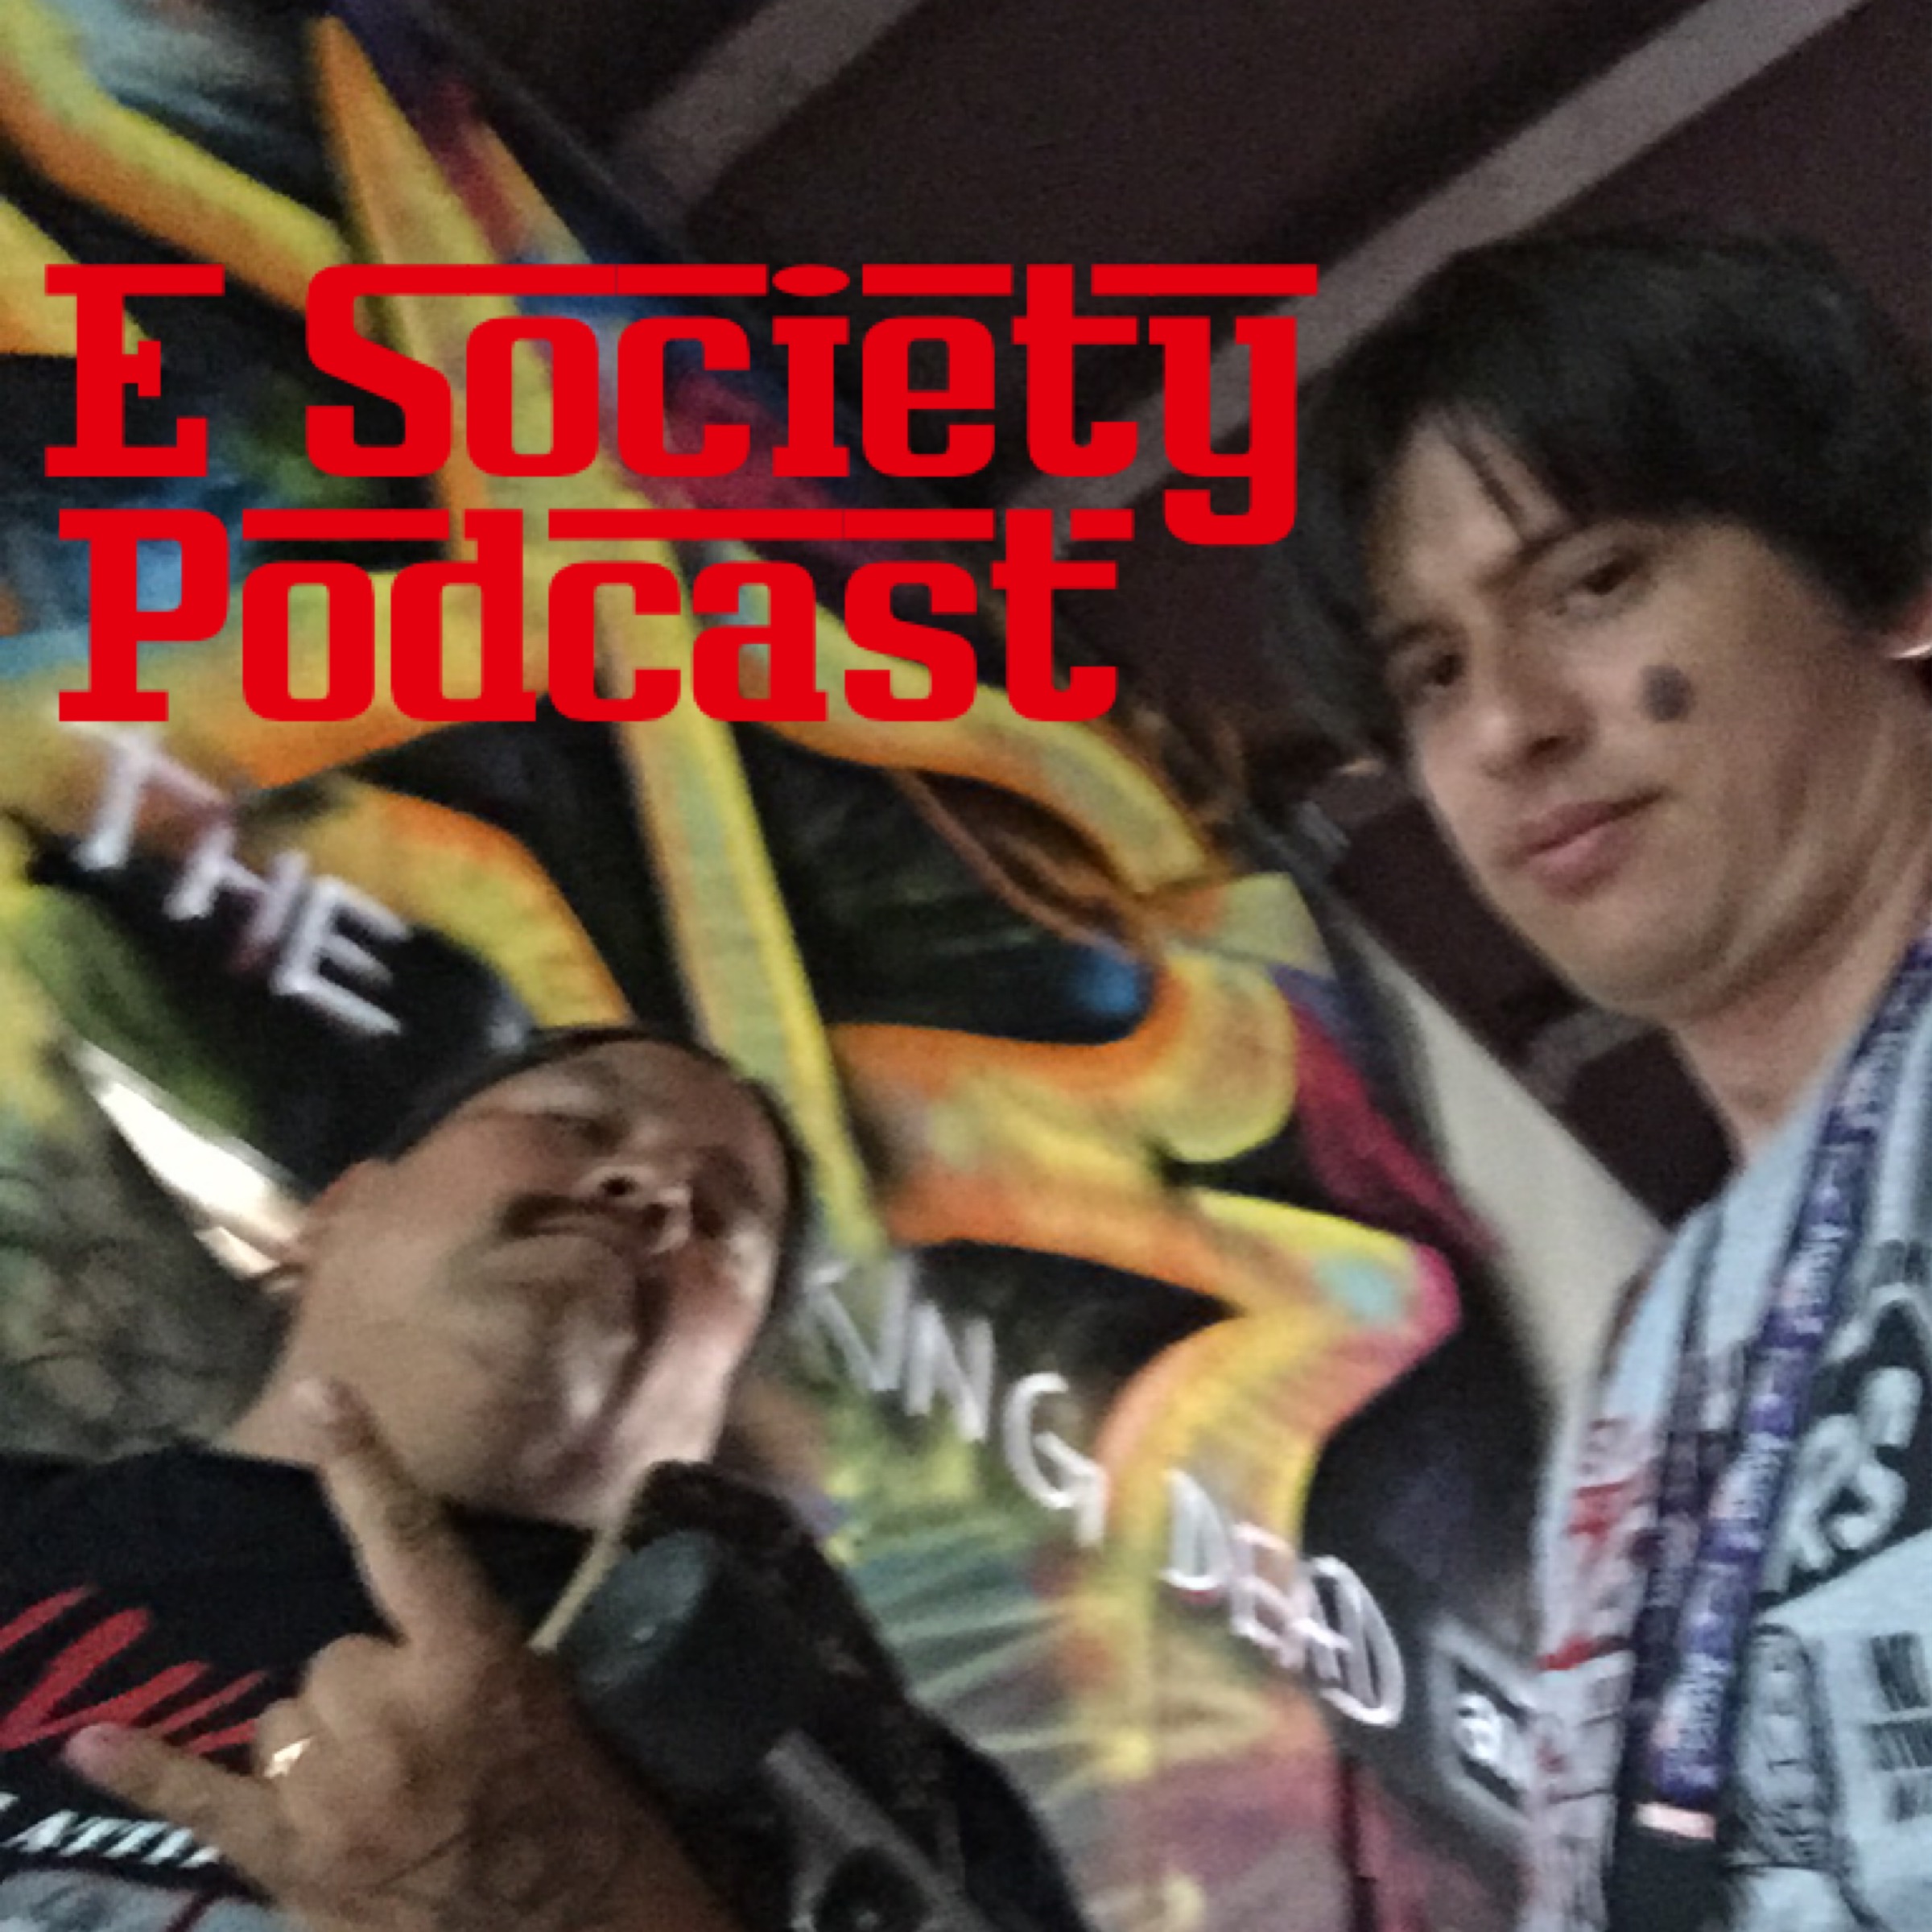 E Society Podcast - Ep. 88: ECCC 2018 and all that.